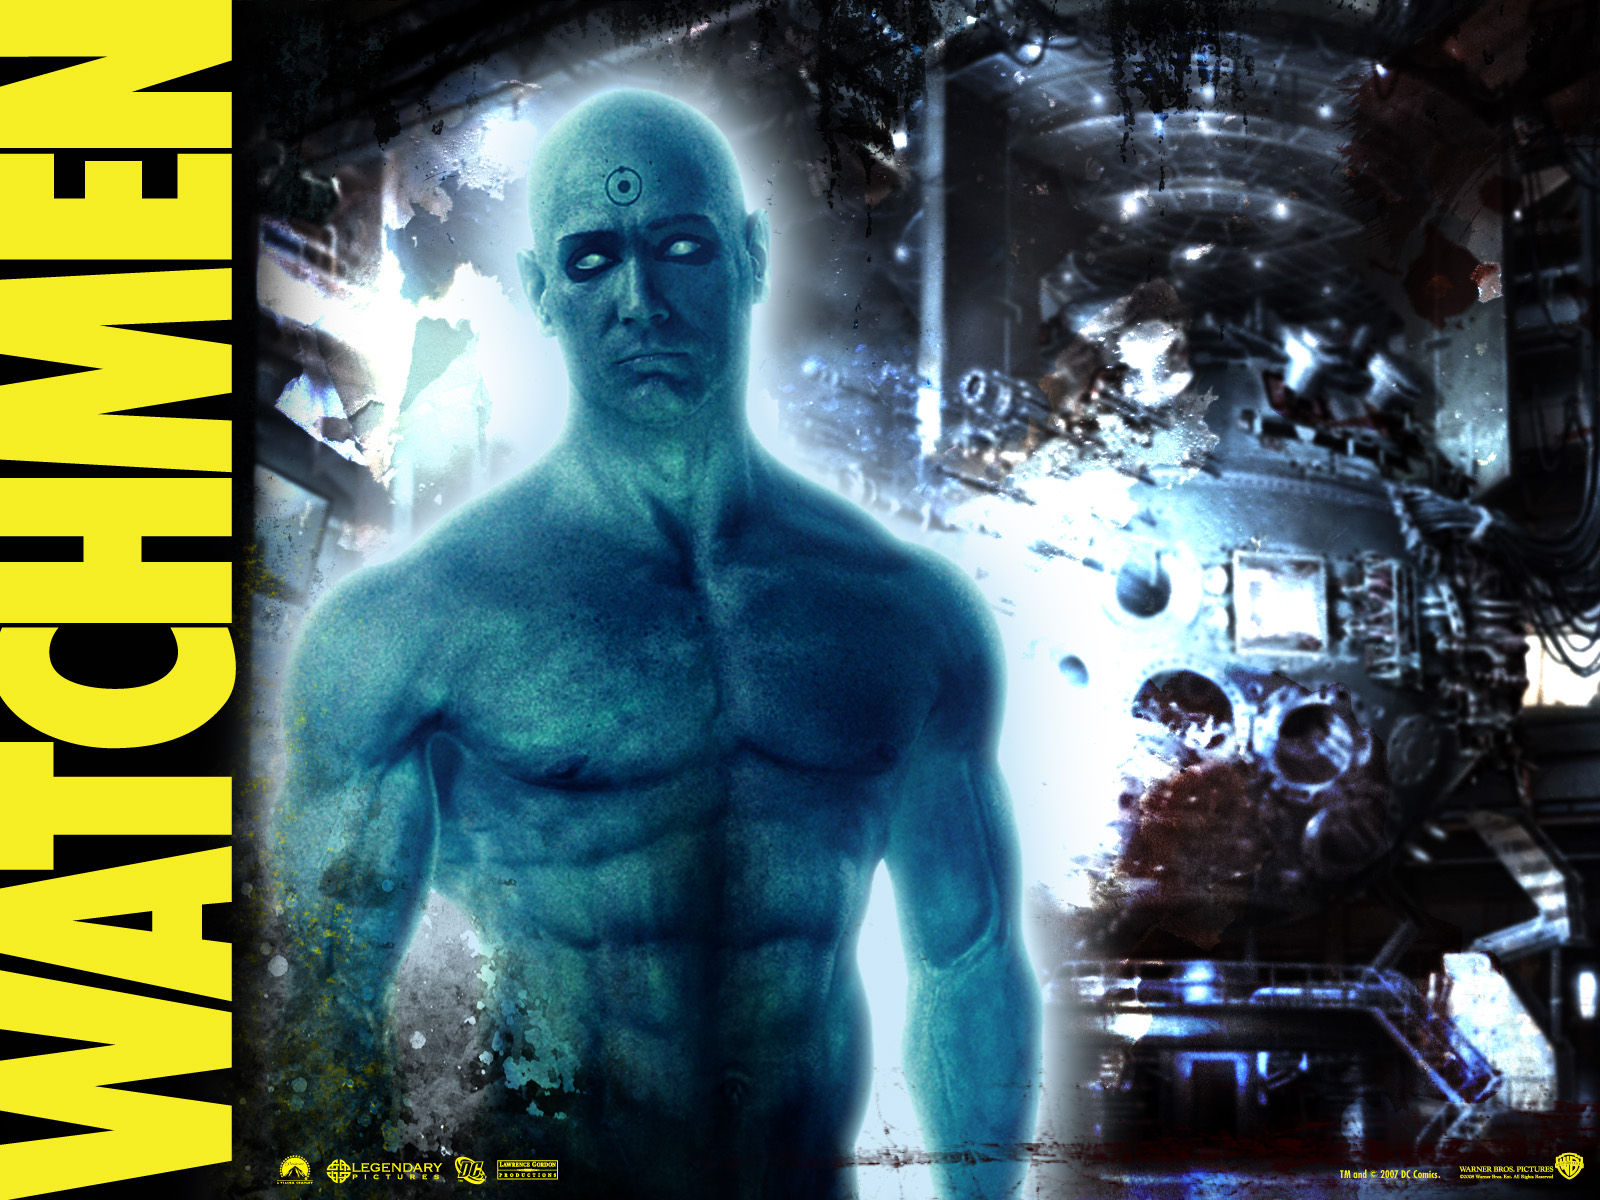 Dr. Manhattan Other images in post